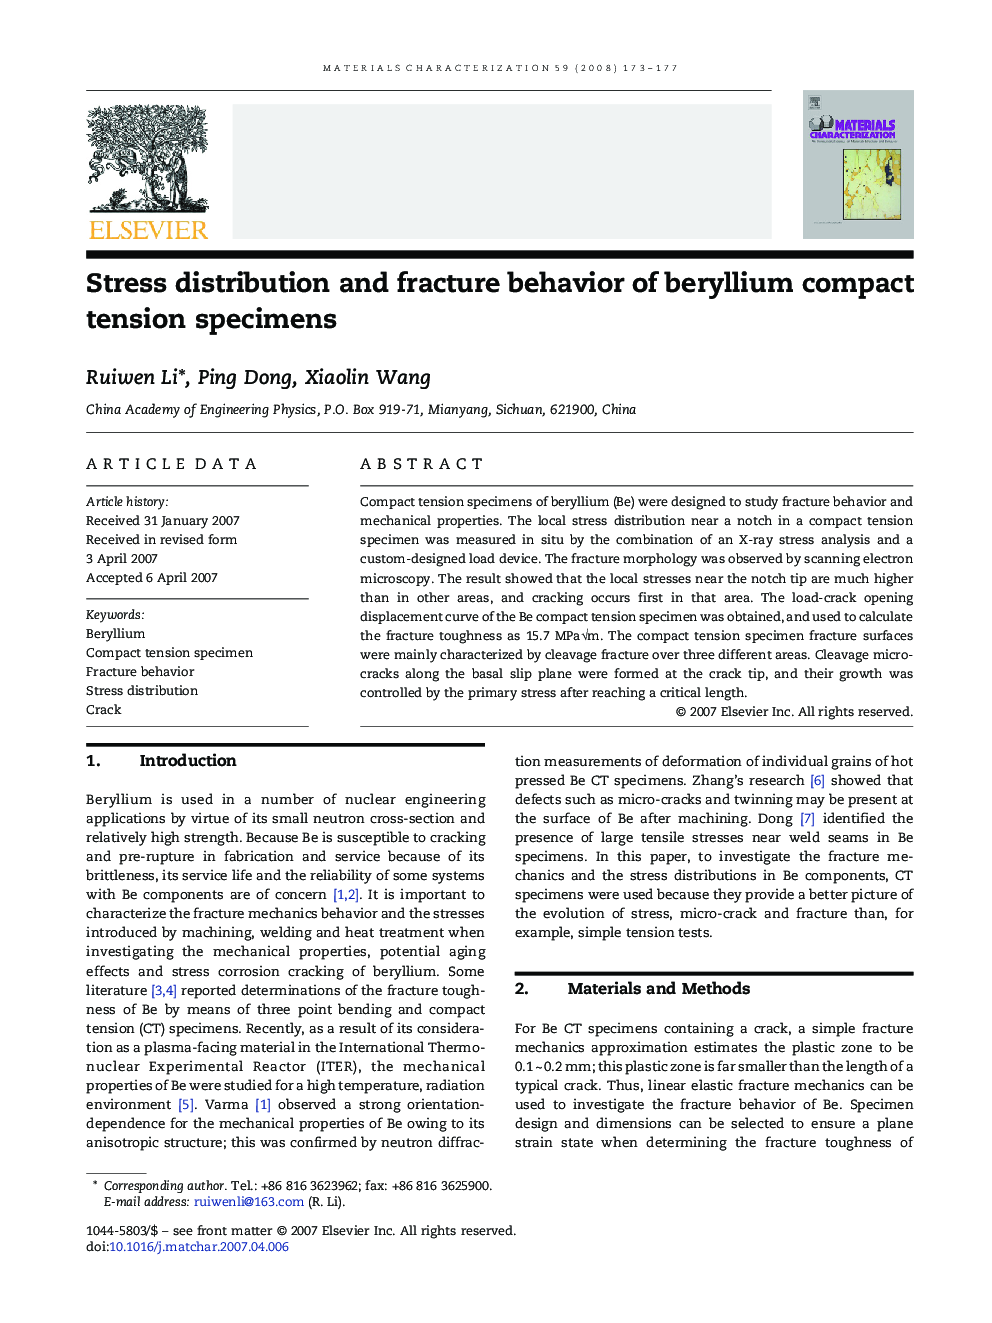 Stress distribution and fracture behavior of beryllium compact tension specimens